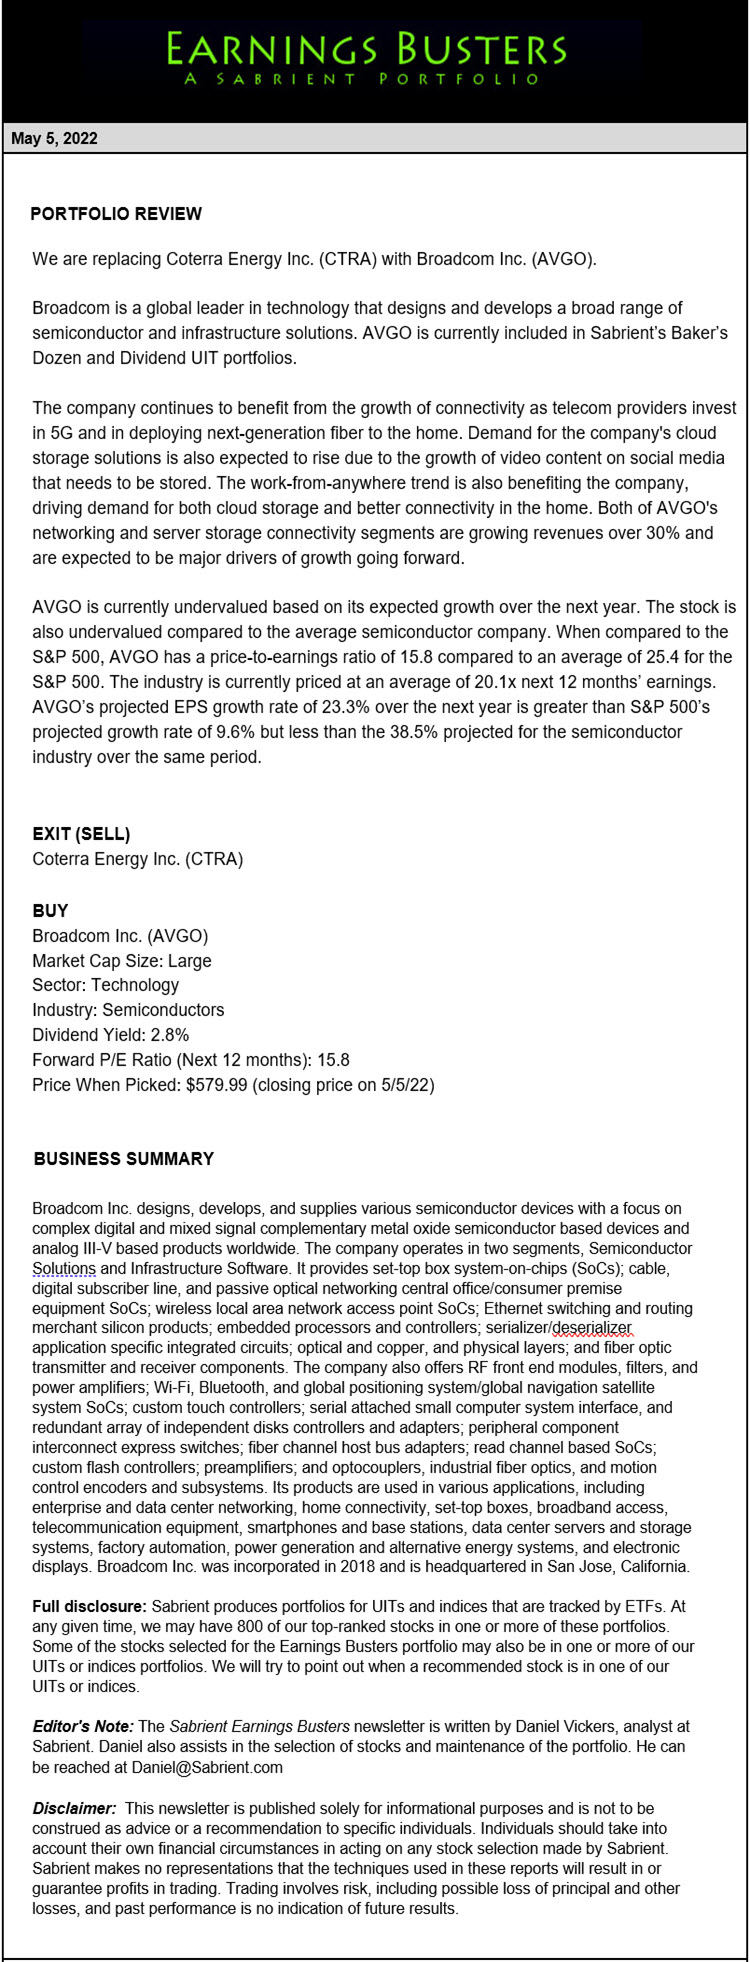 Earnings Busters Newsletter - May 5, 2022